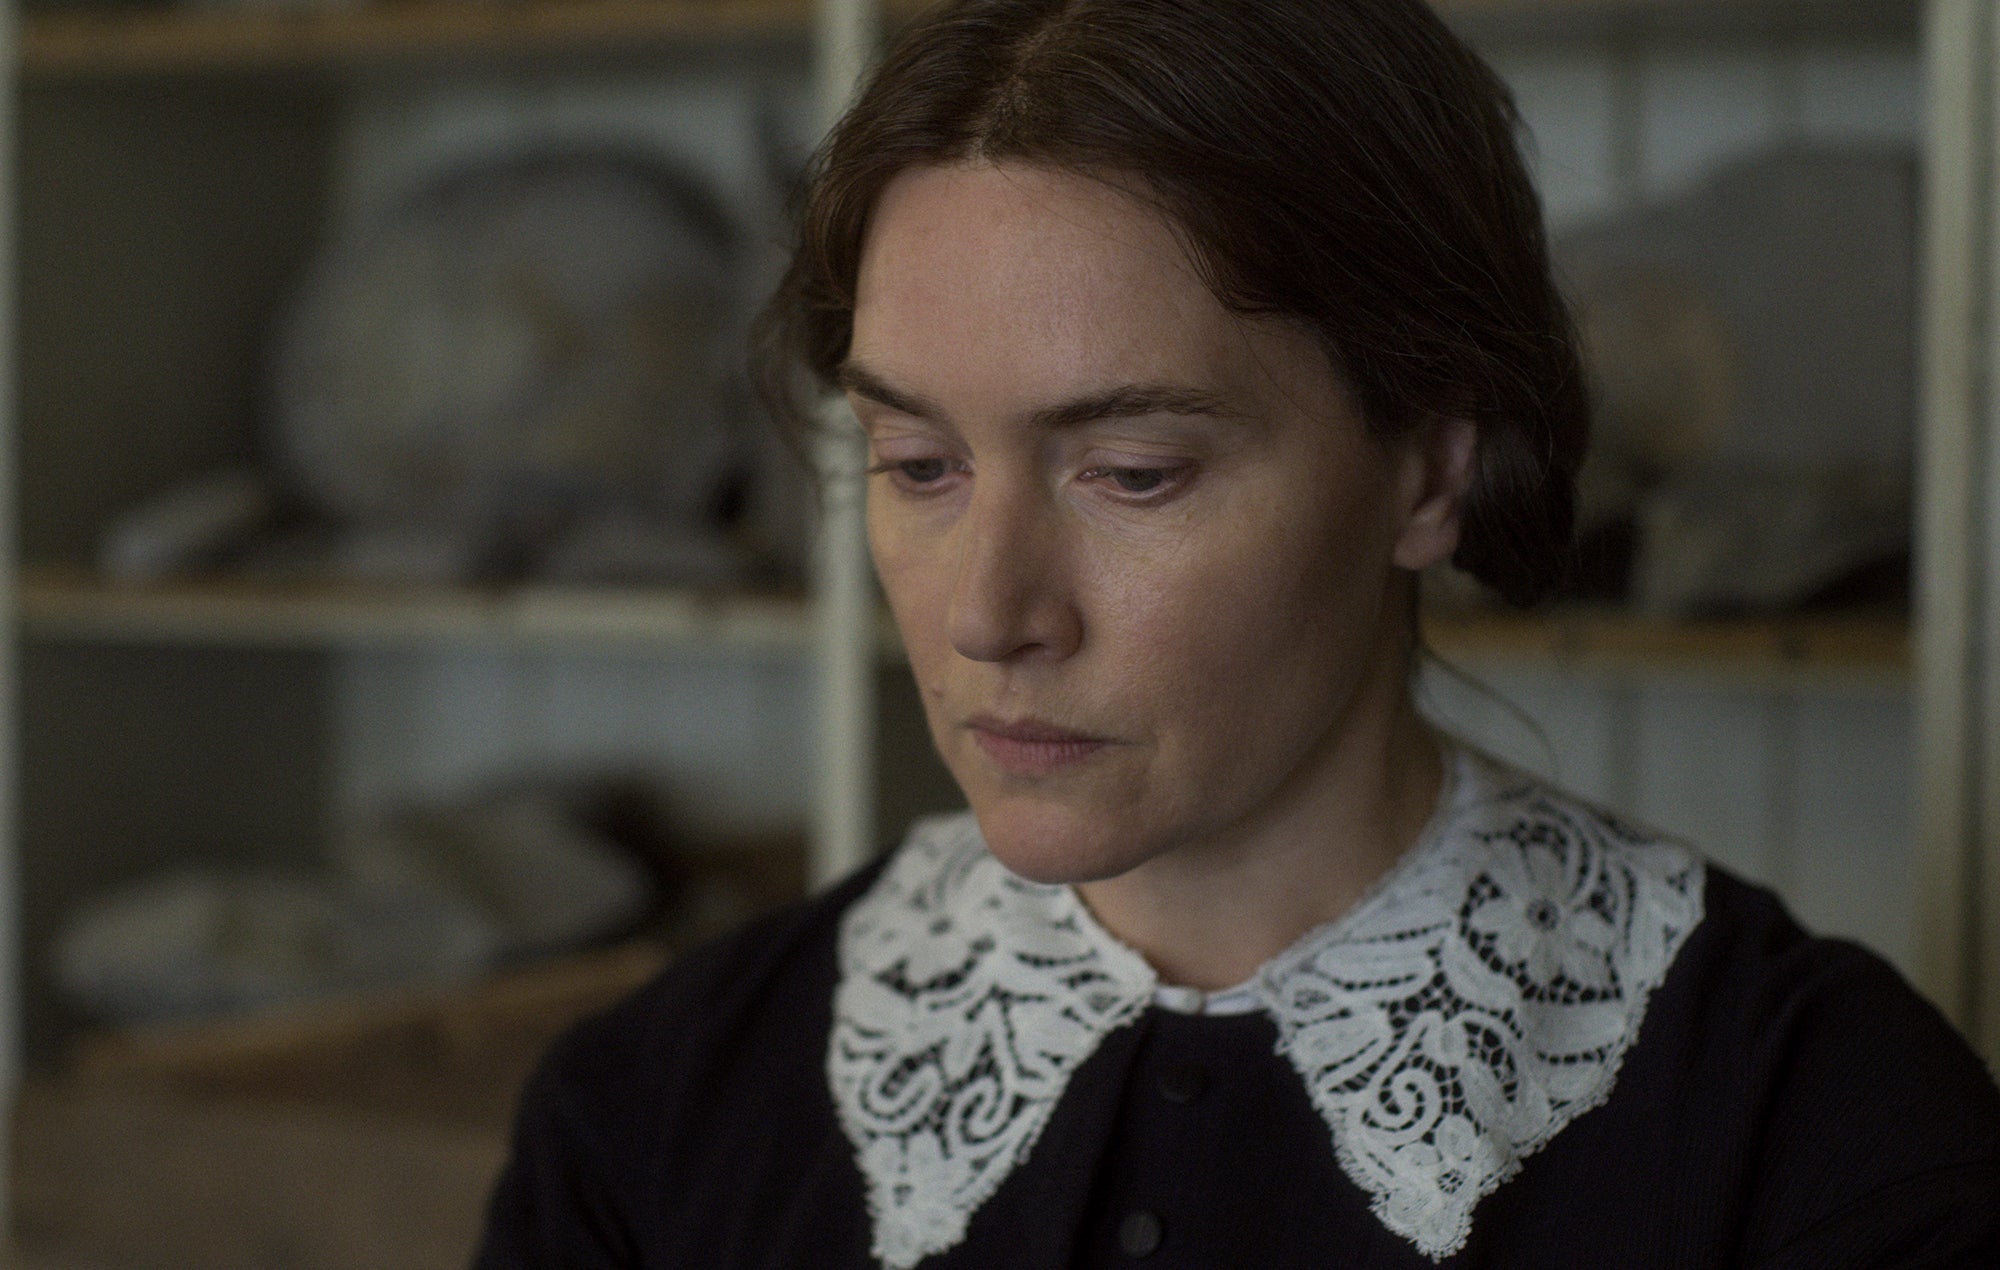 Kate Winslet is ferocious as Mary Anning – a performance that’s powered by steam locomotive, made unstoppable